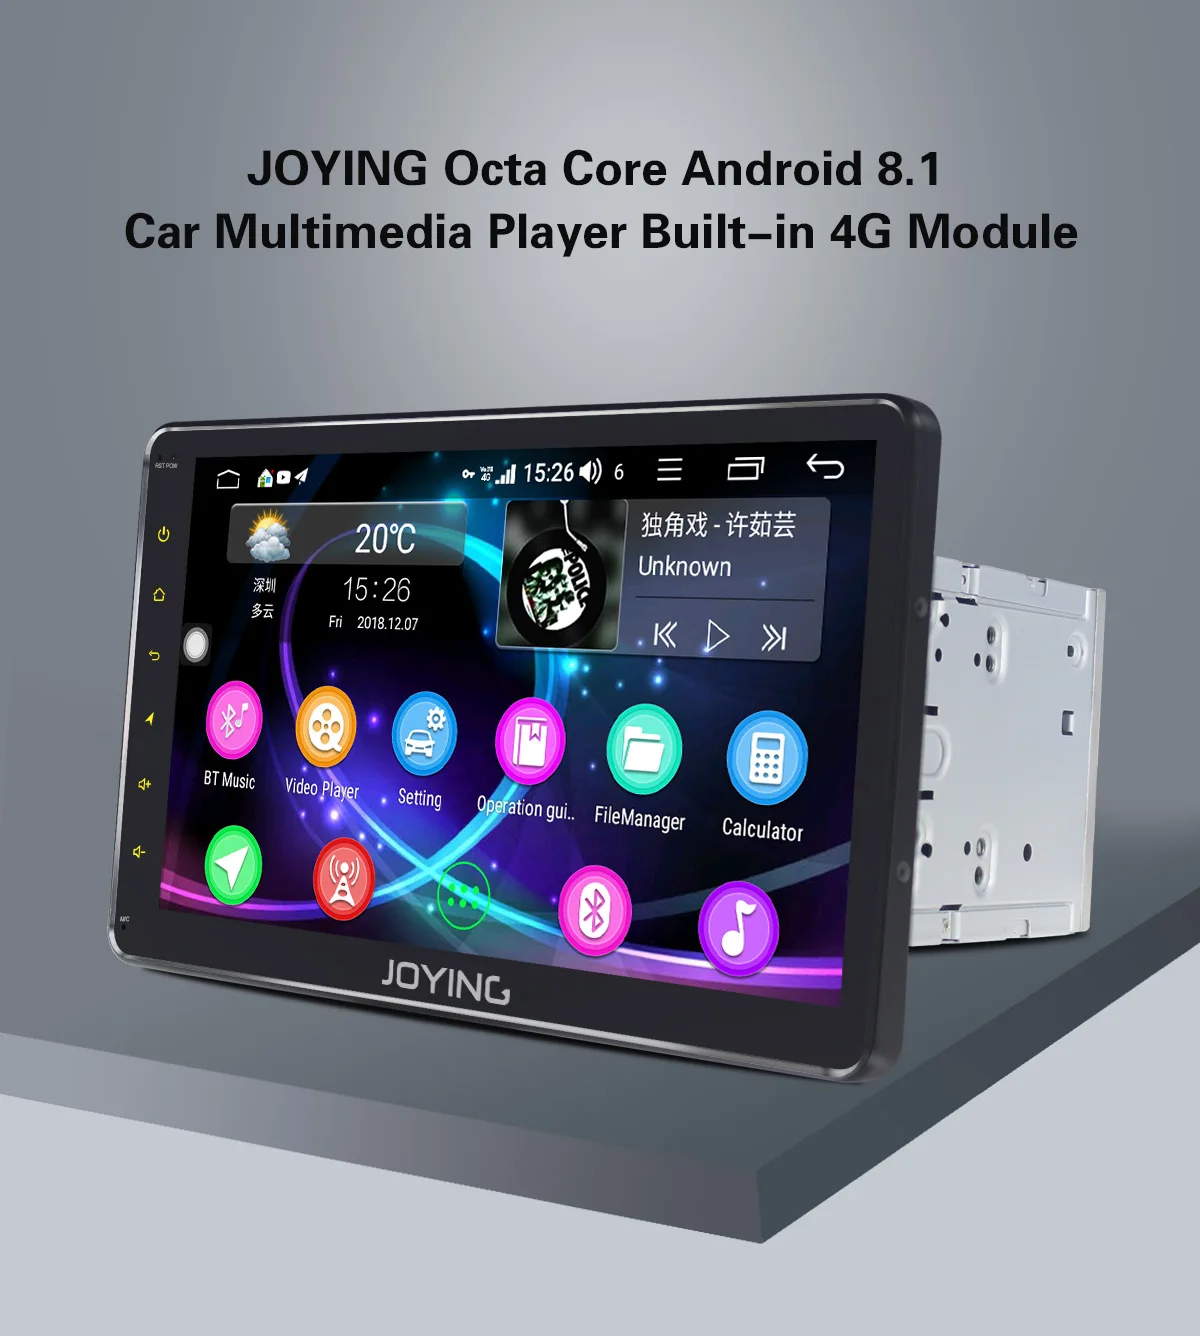 Perfect Joying 10.1" Double 2Din Android 8.1 Car Radio Stereo GPS Navigation Universal Head Unit Built-in 4G Modem DSP Multimedia Player 0